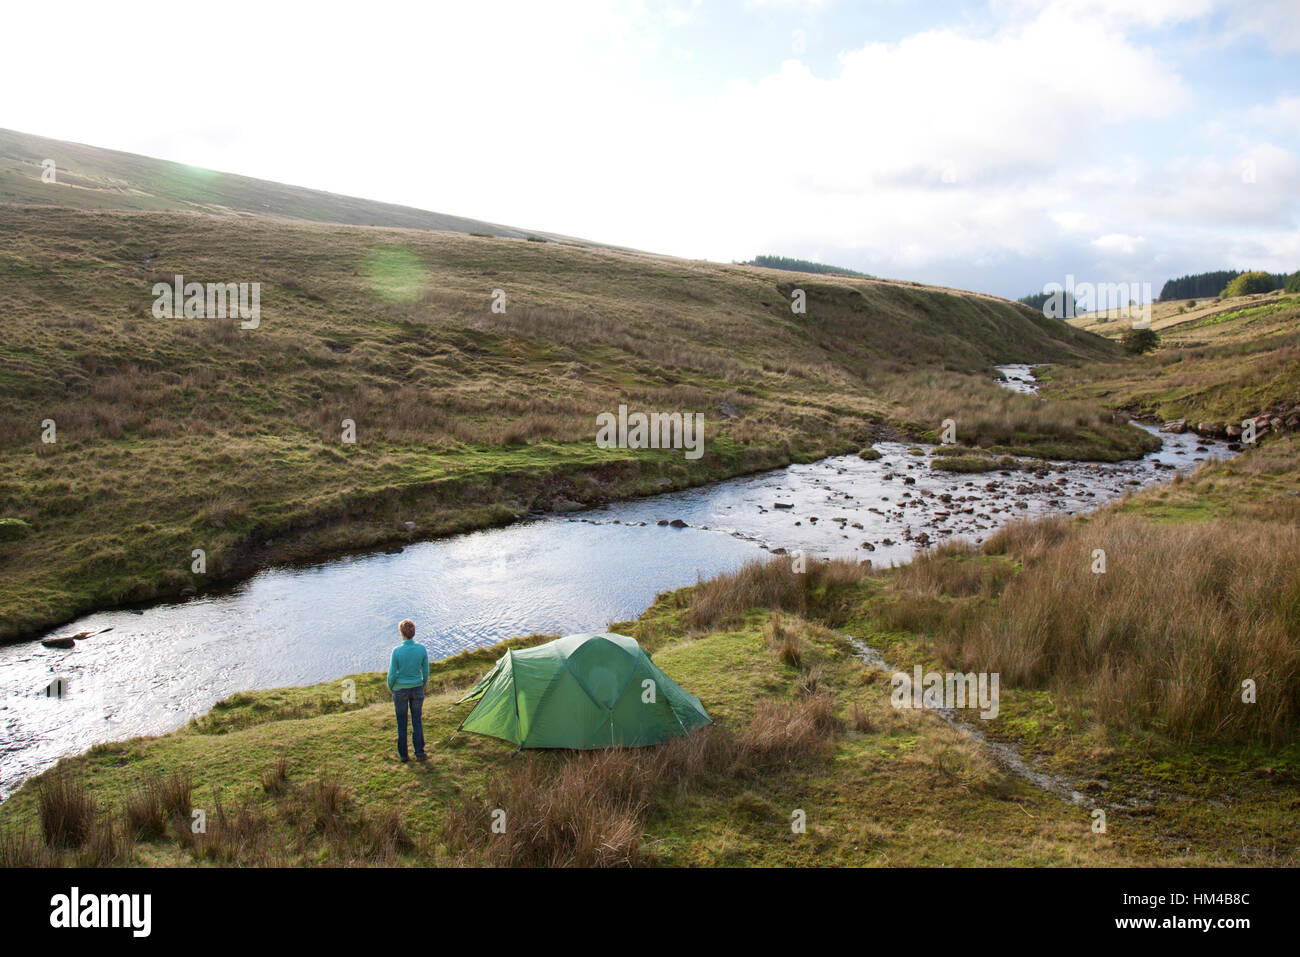 Wild camping by a river in a high valley in the Brecon Beacons, South Wales Stock Photo